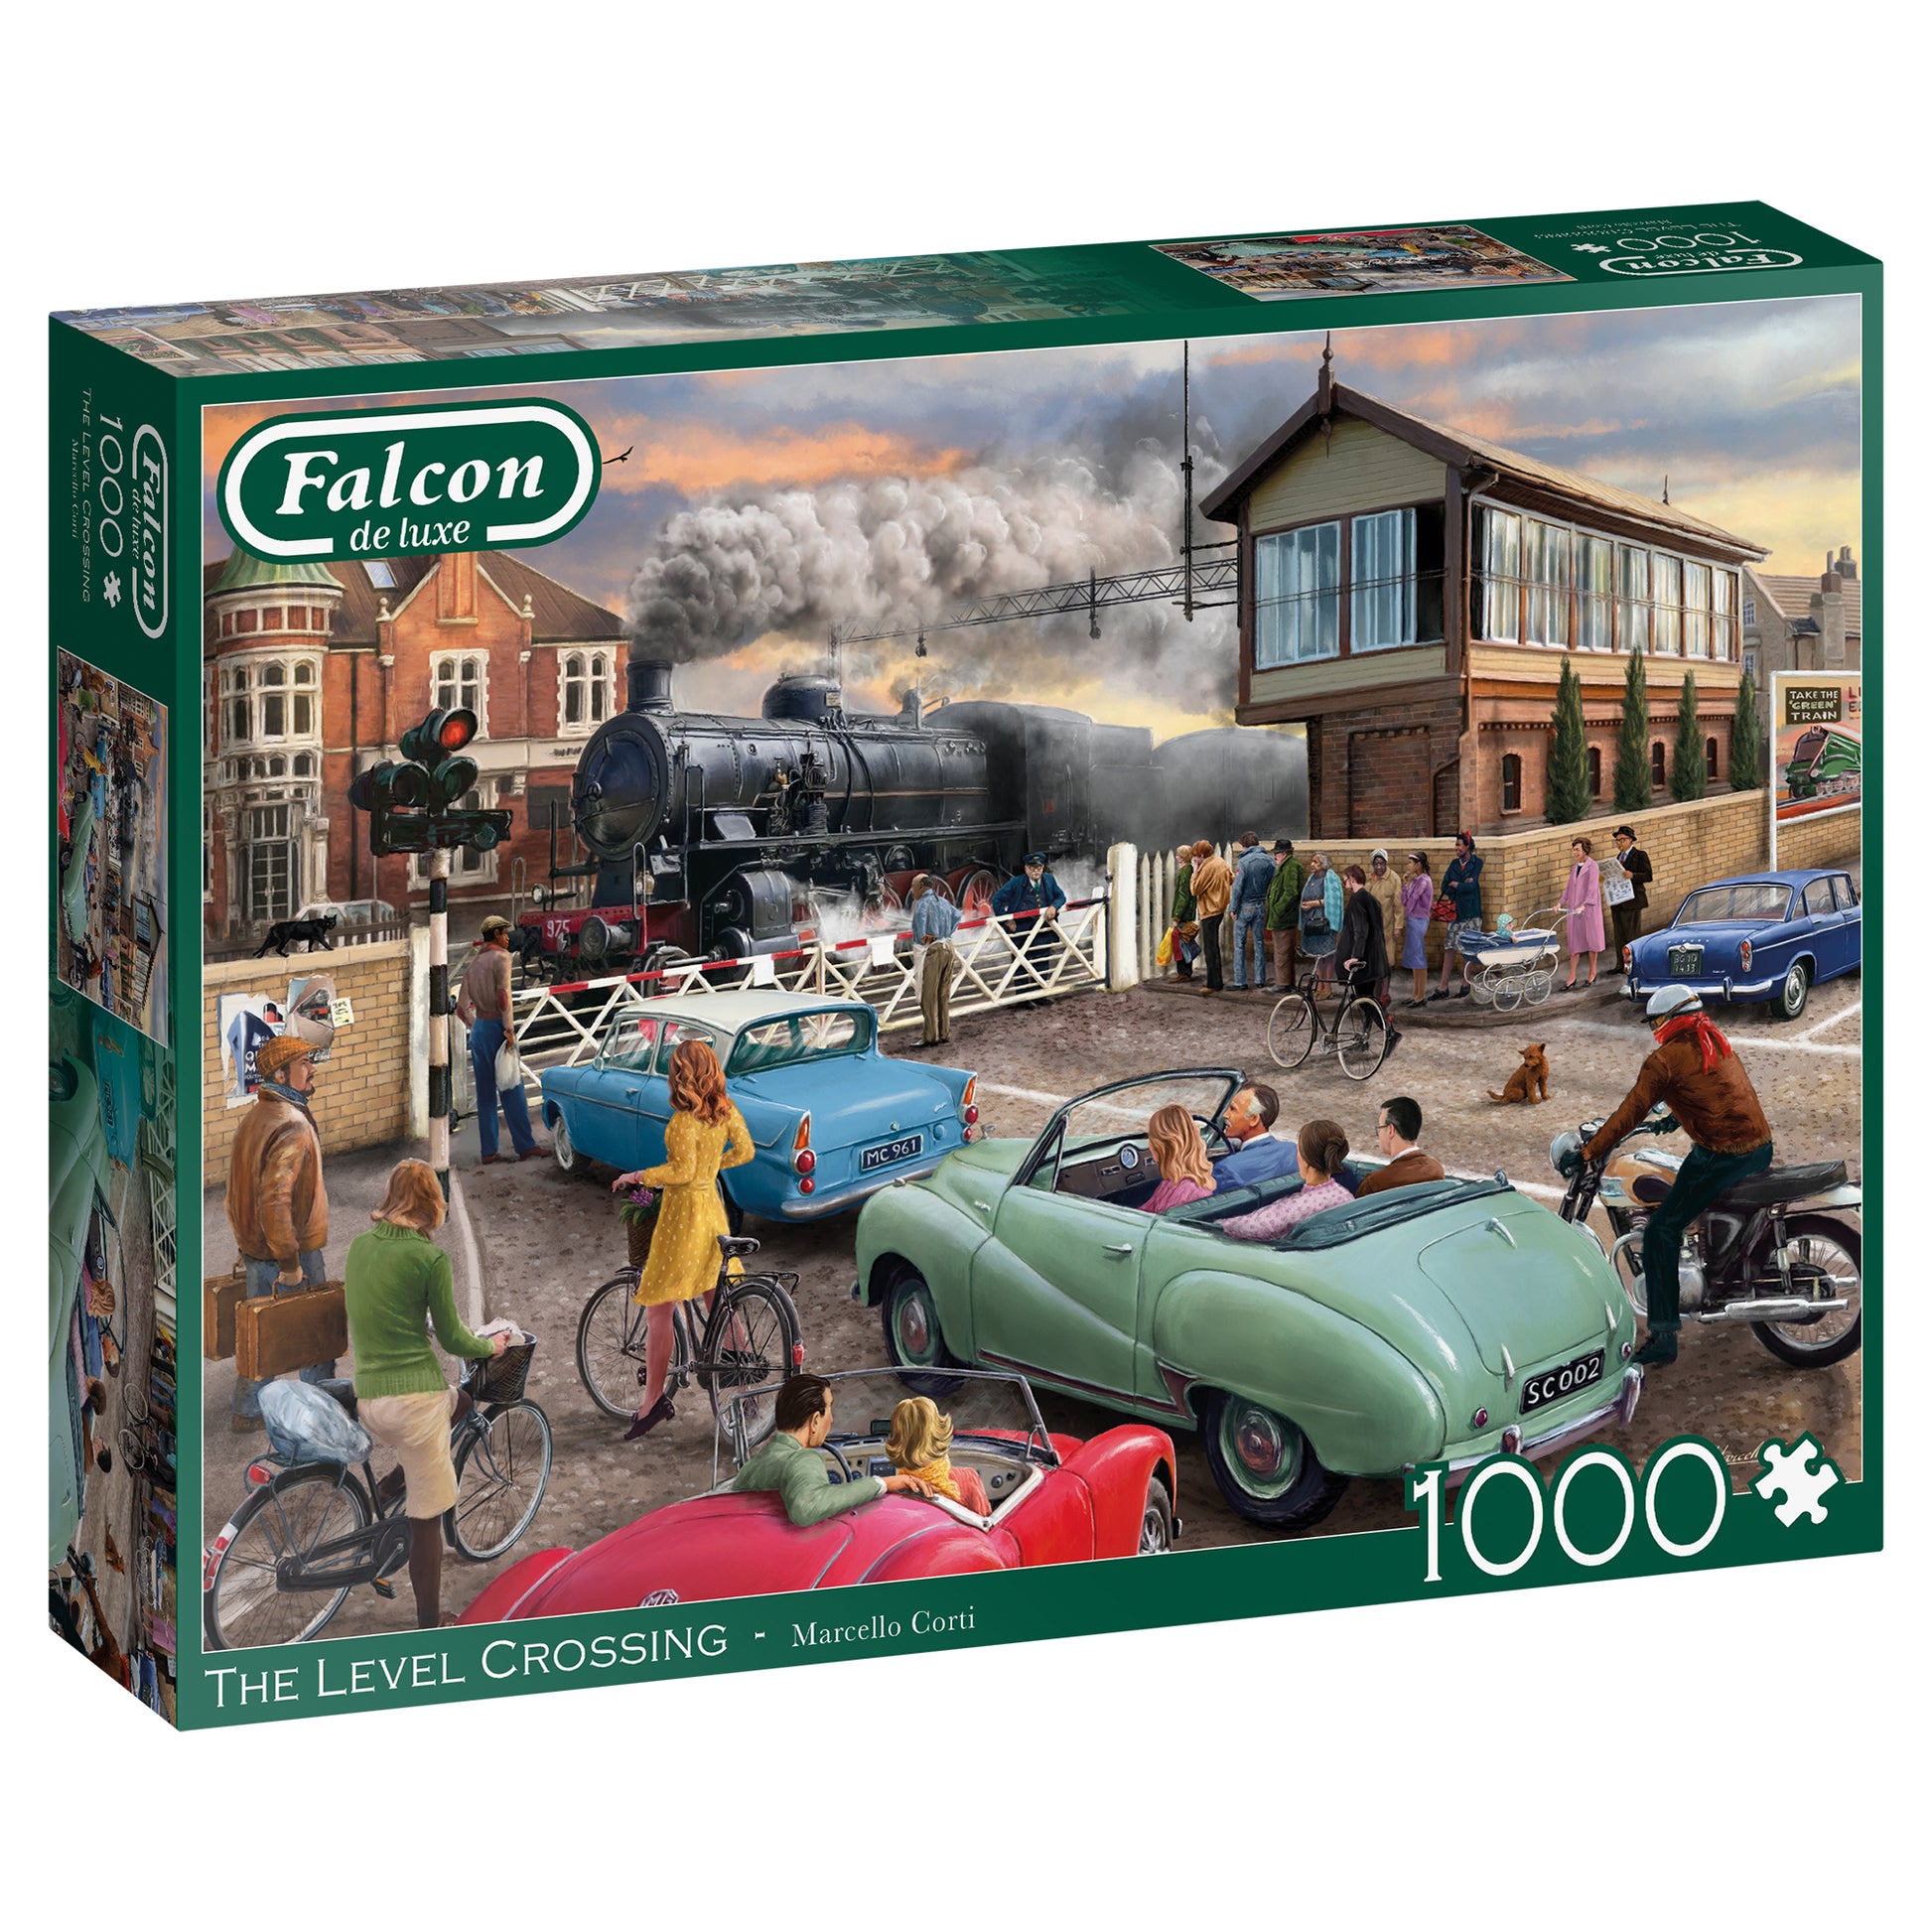 Falcon - The Level Crossing (1000 pieces) - product image - Jumboplay.com